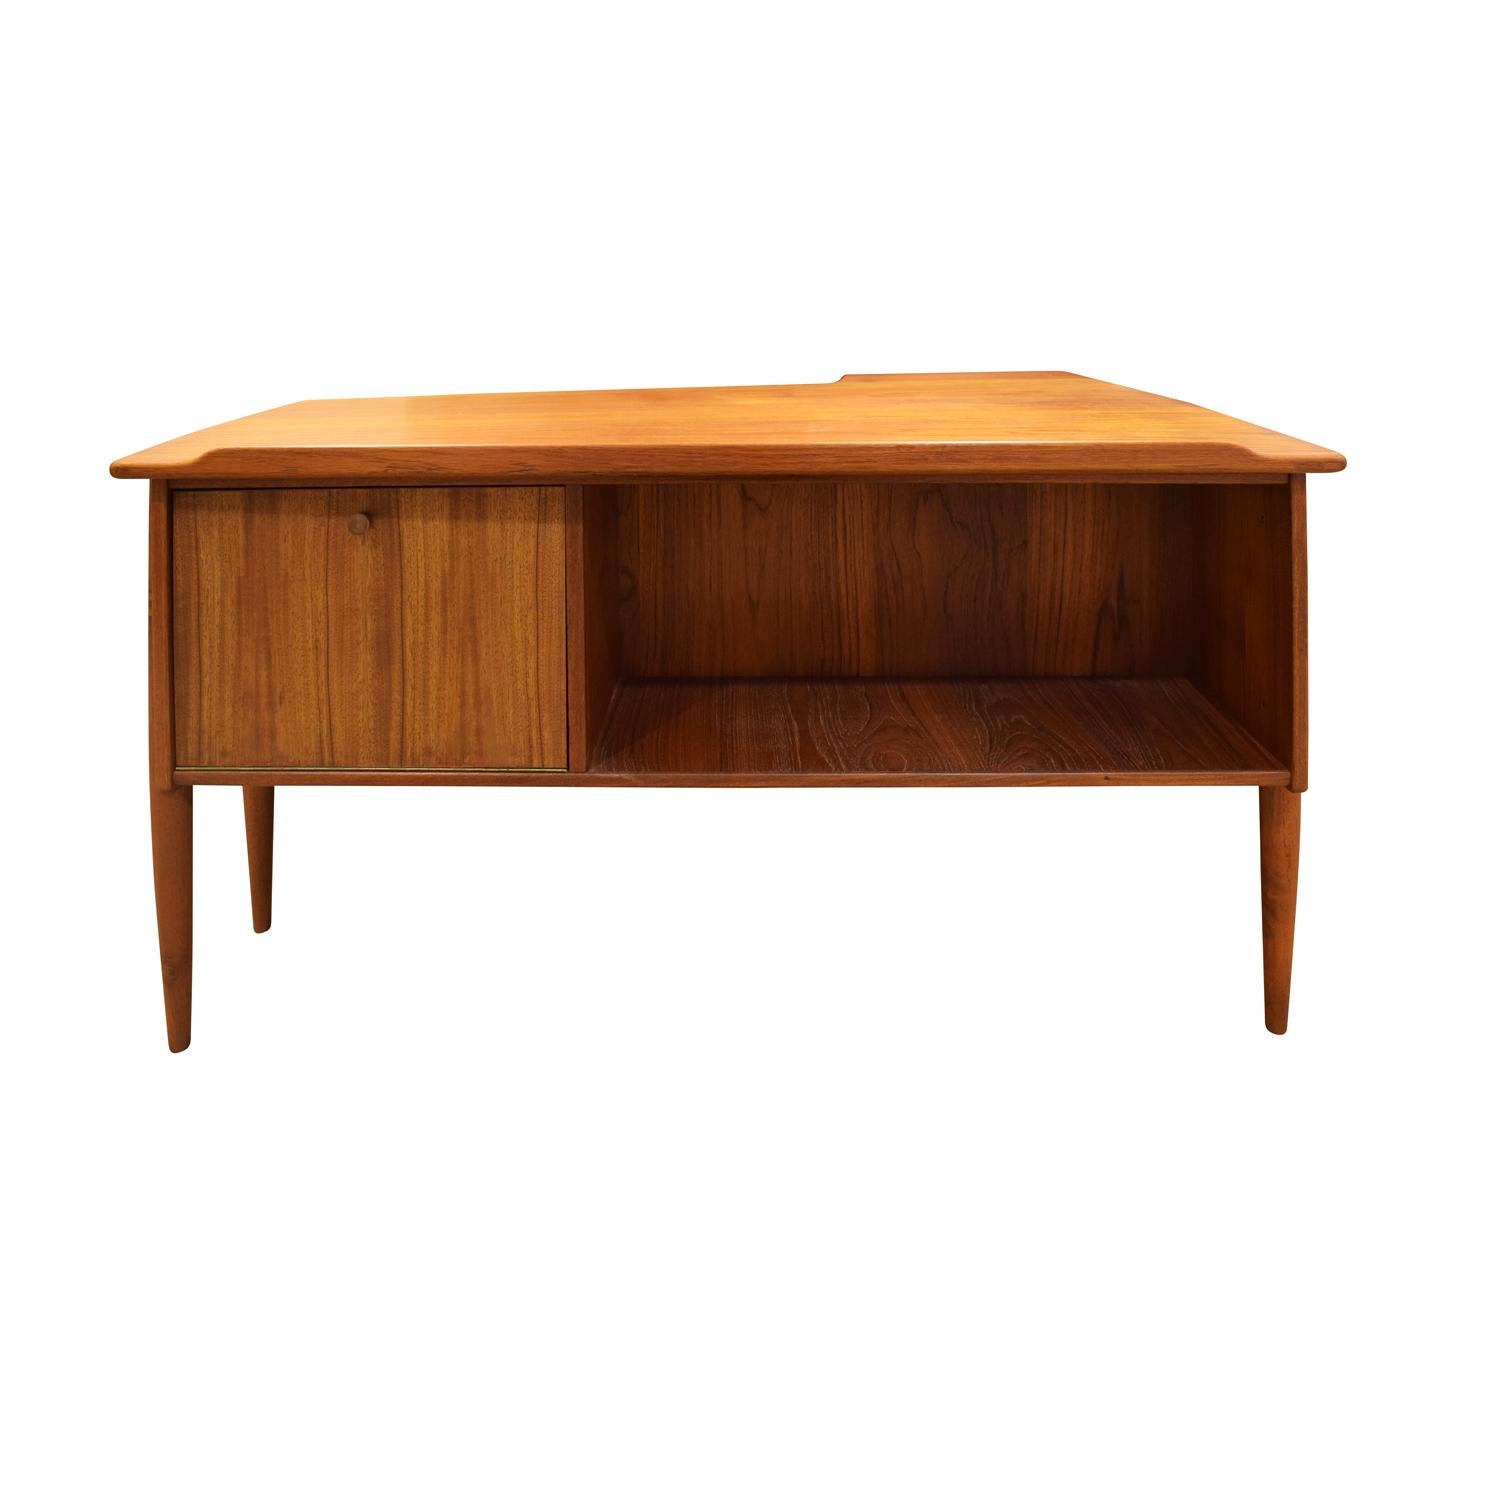 Hand-Crafted Beautifully Crafted Swedish Desk in Teak, 1960s For Sale